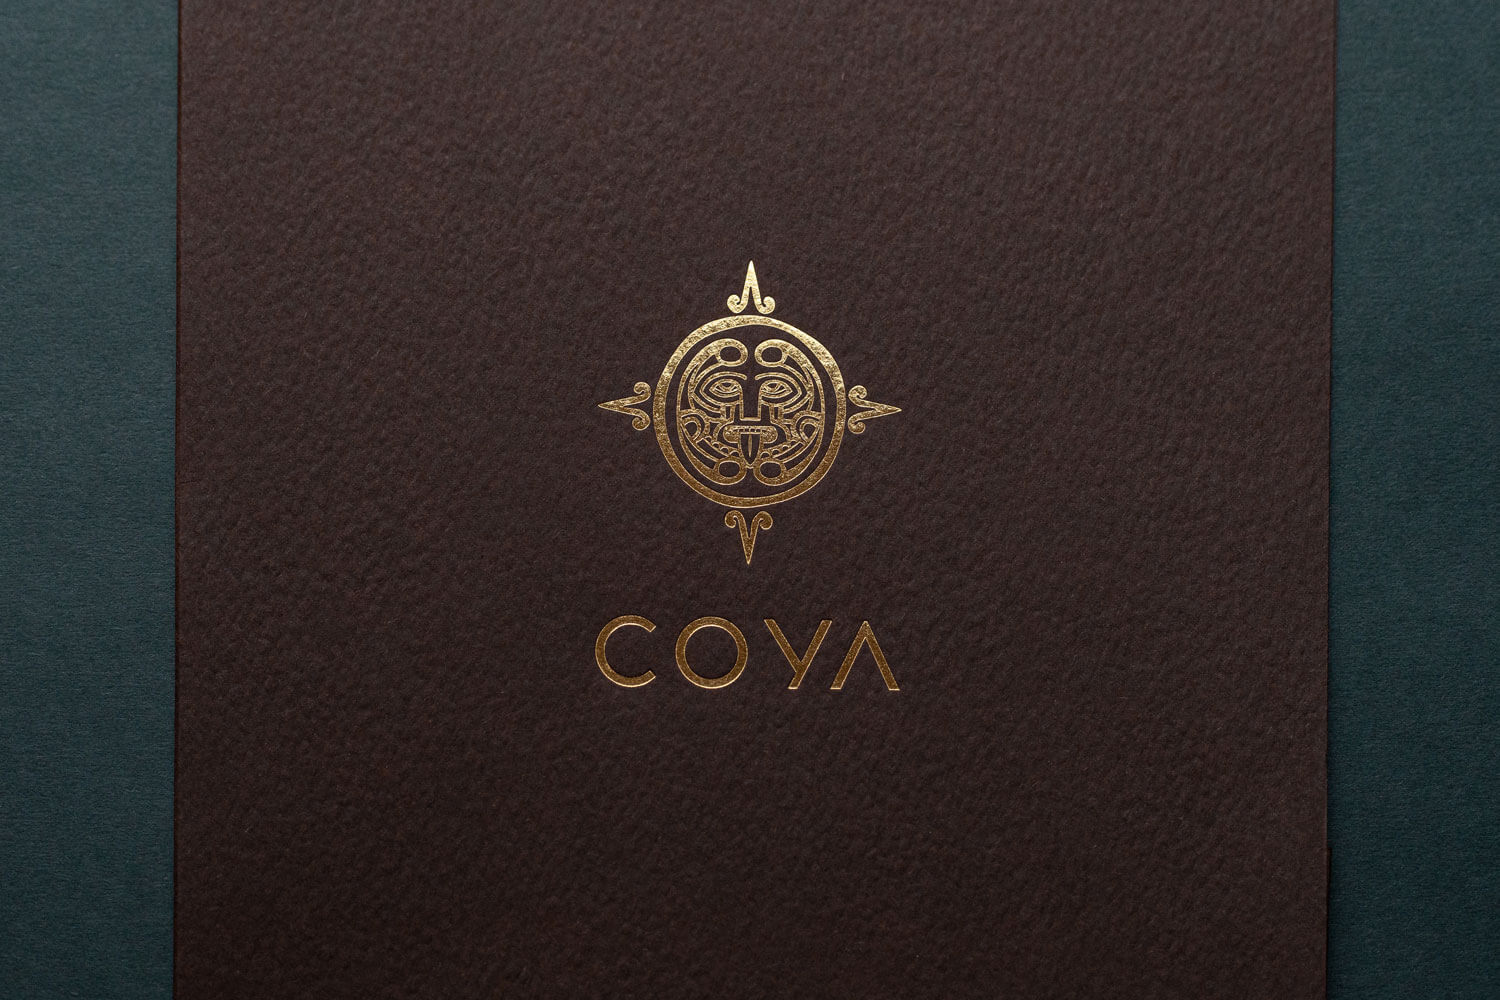 a gold foiled mayfair restaurant logo printed on a luxurious textured card saying COYA